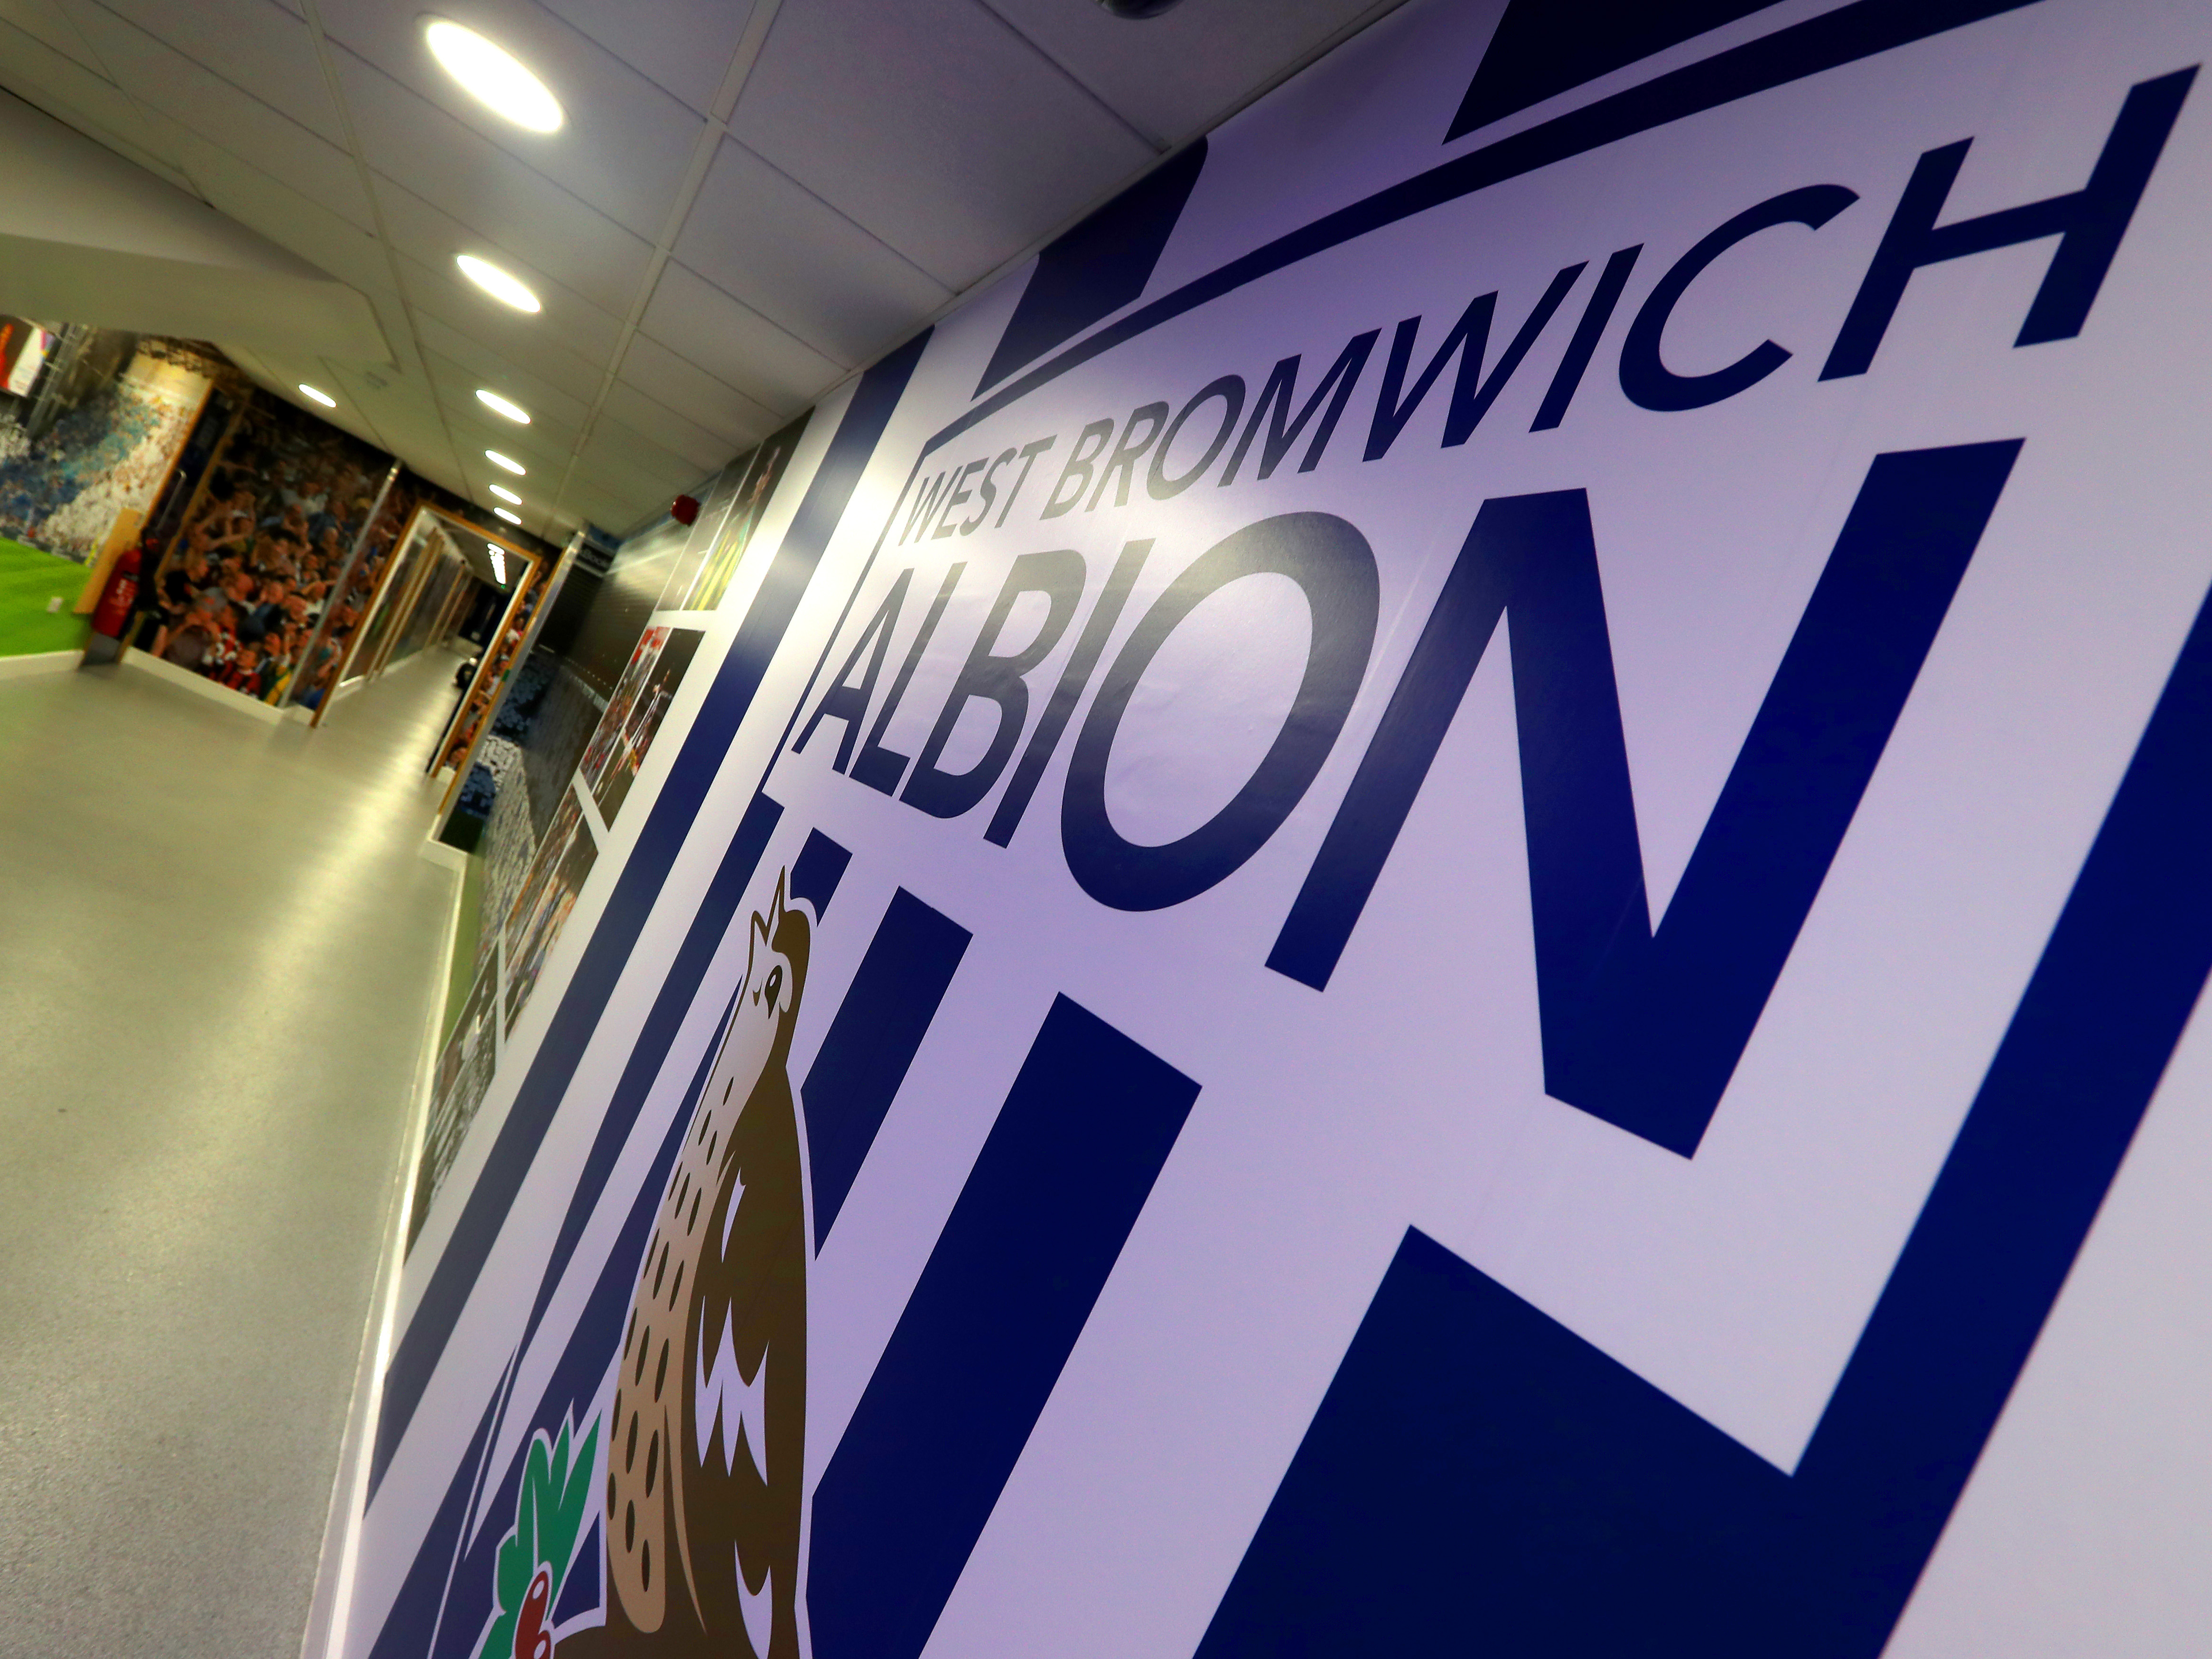 The Albion crest on the wall at The Hawthorns